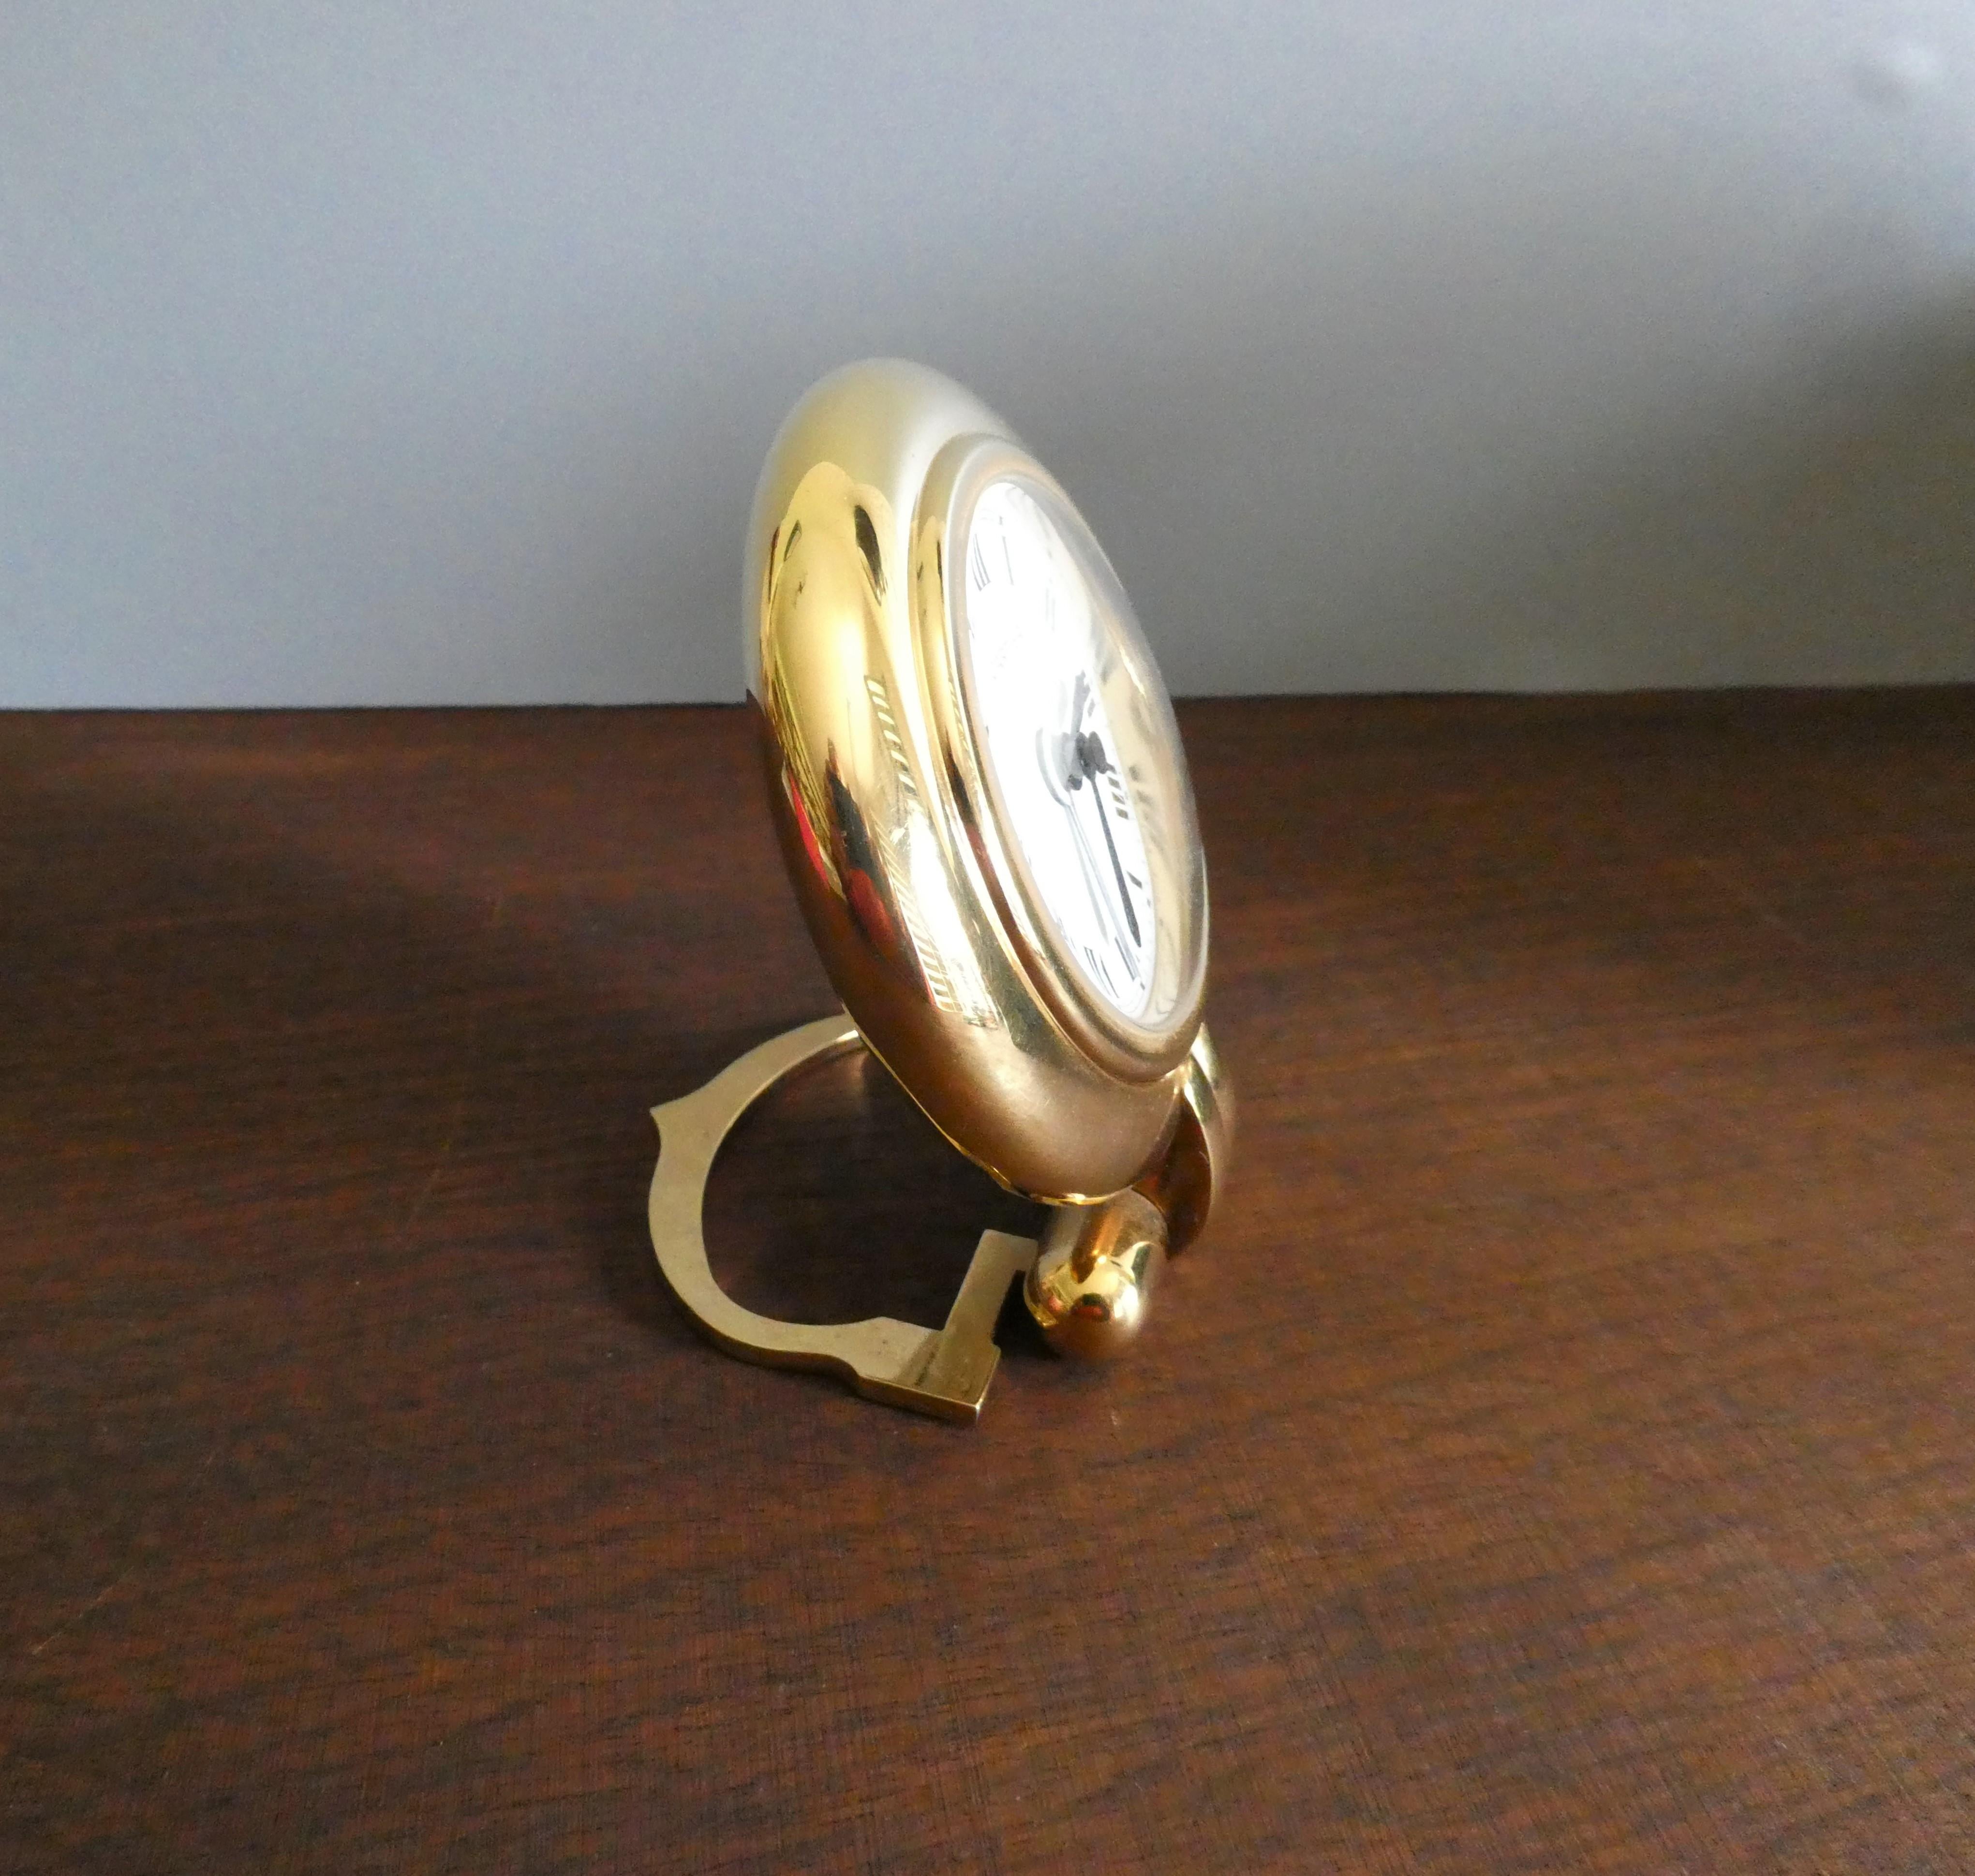 Brass Travel and Alarm Clock by Cartier In Good Condition For Sale In Norwich, GB